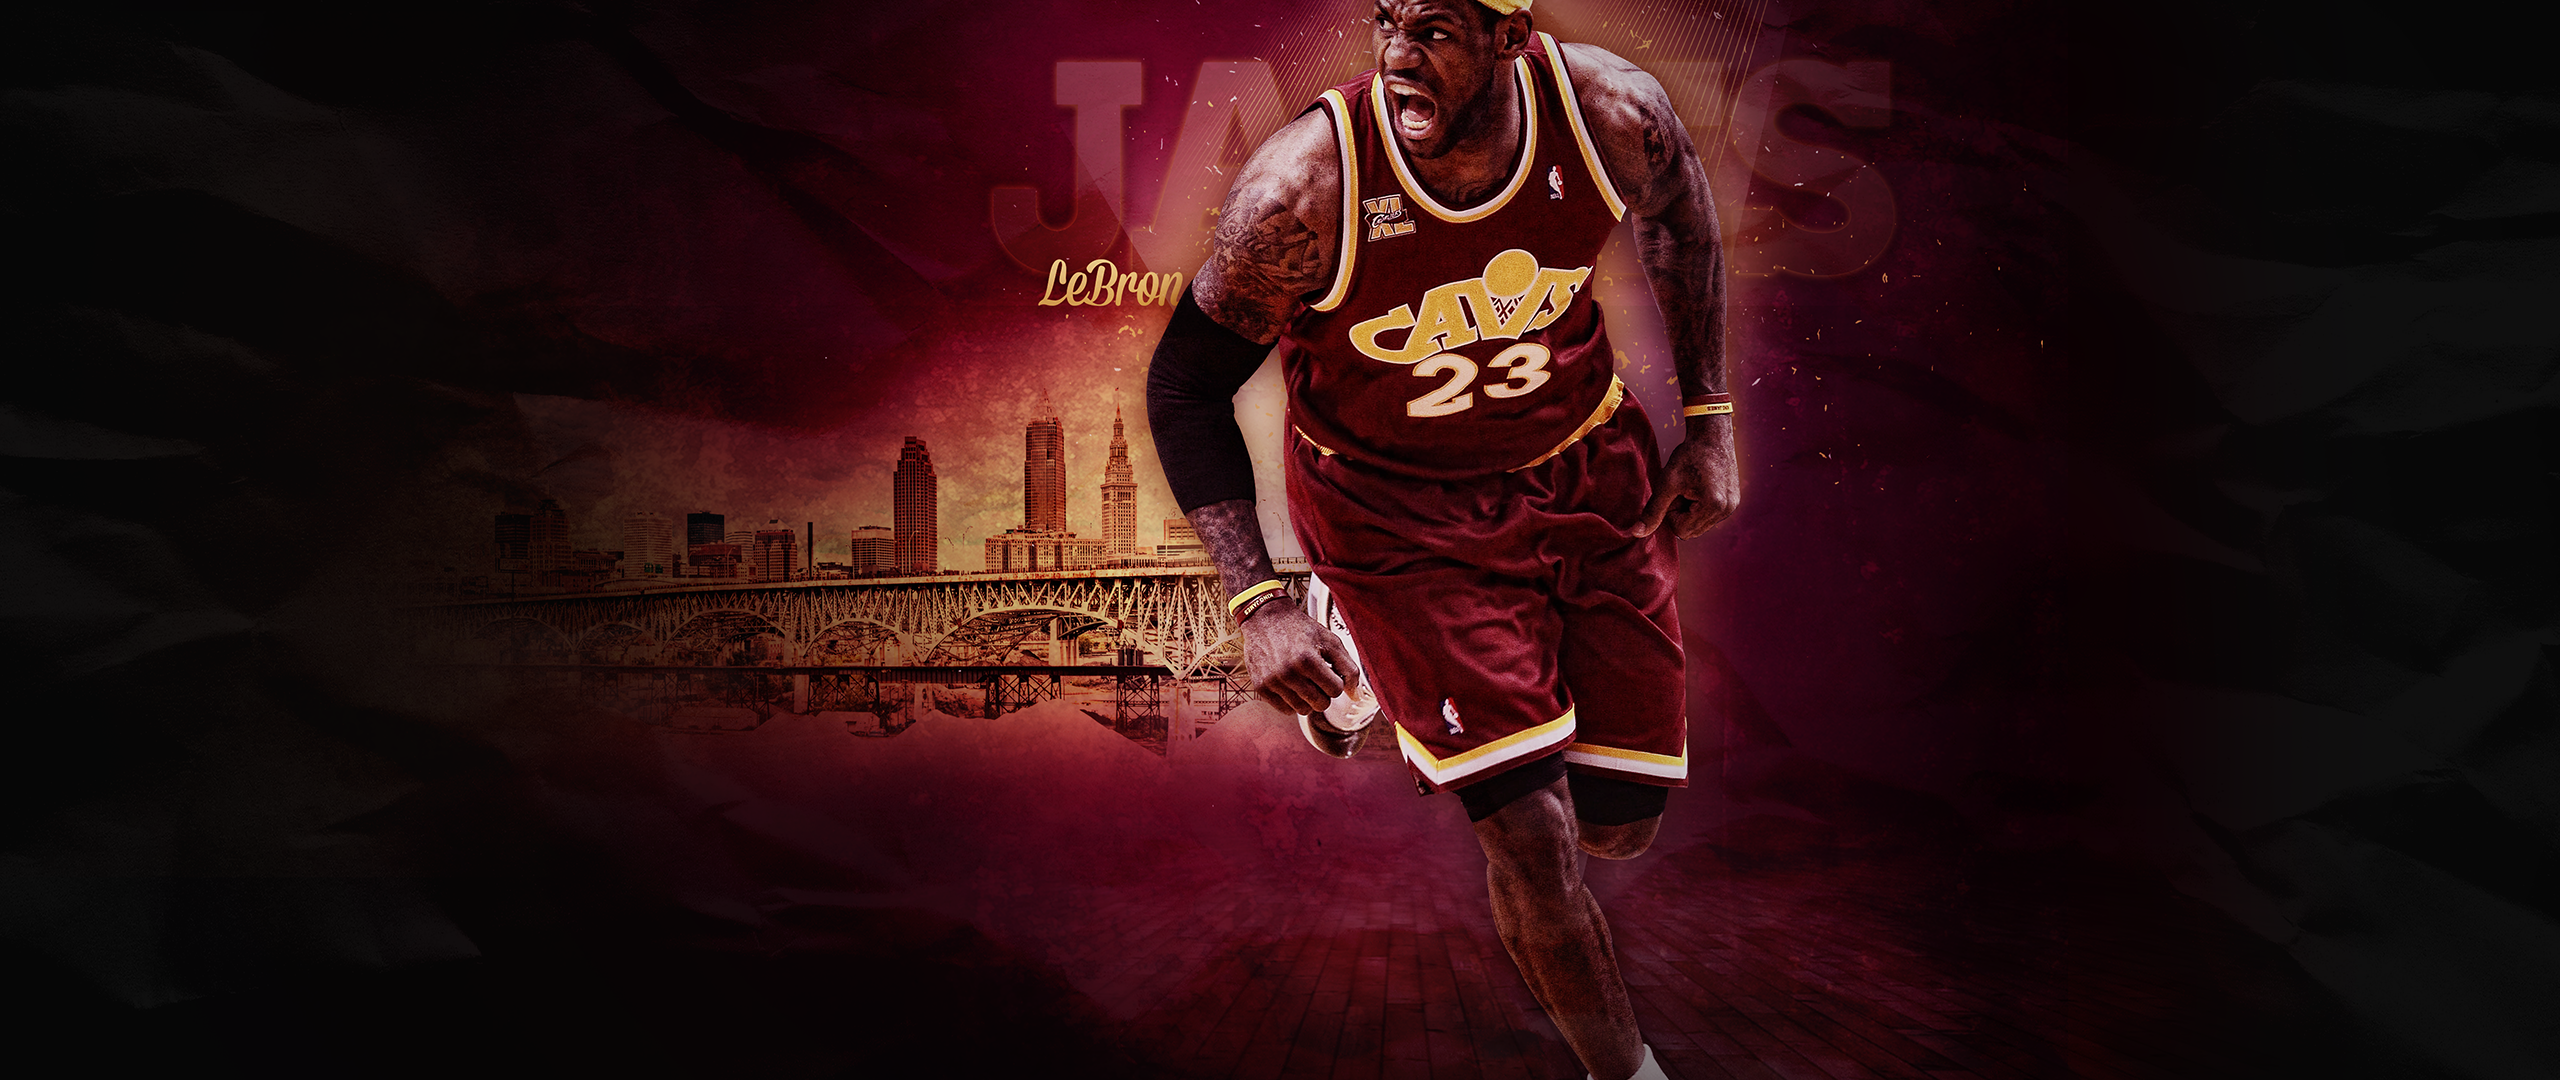 Desktop Wallpaper Lebron James Basketball Player Of Cleveland Cavaliers Wallpaper, HD Image, Picture, Background, Itcqk0